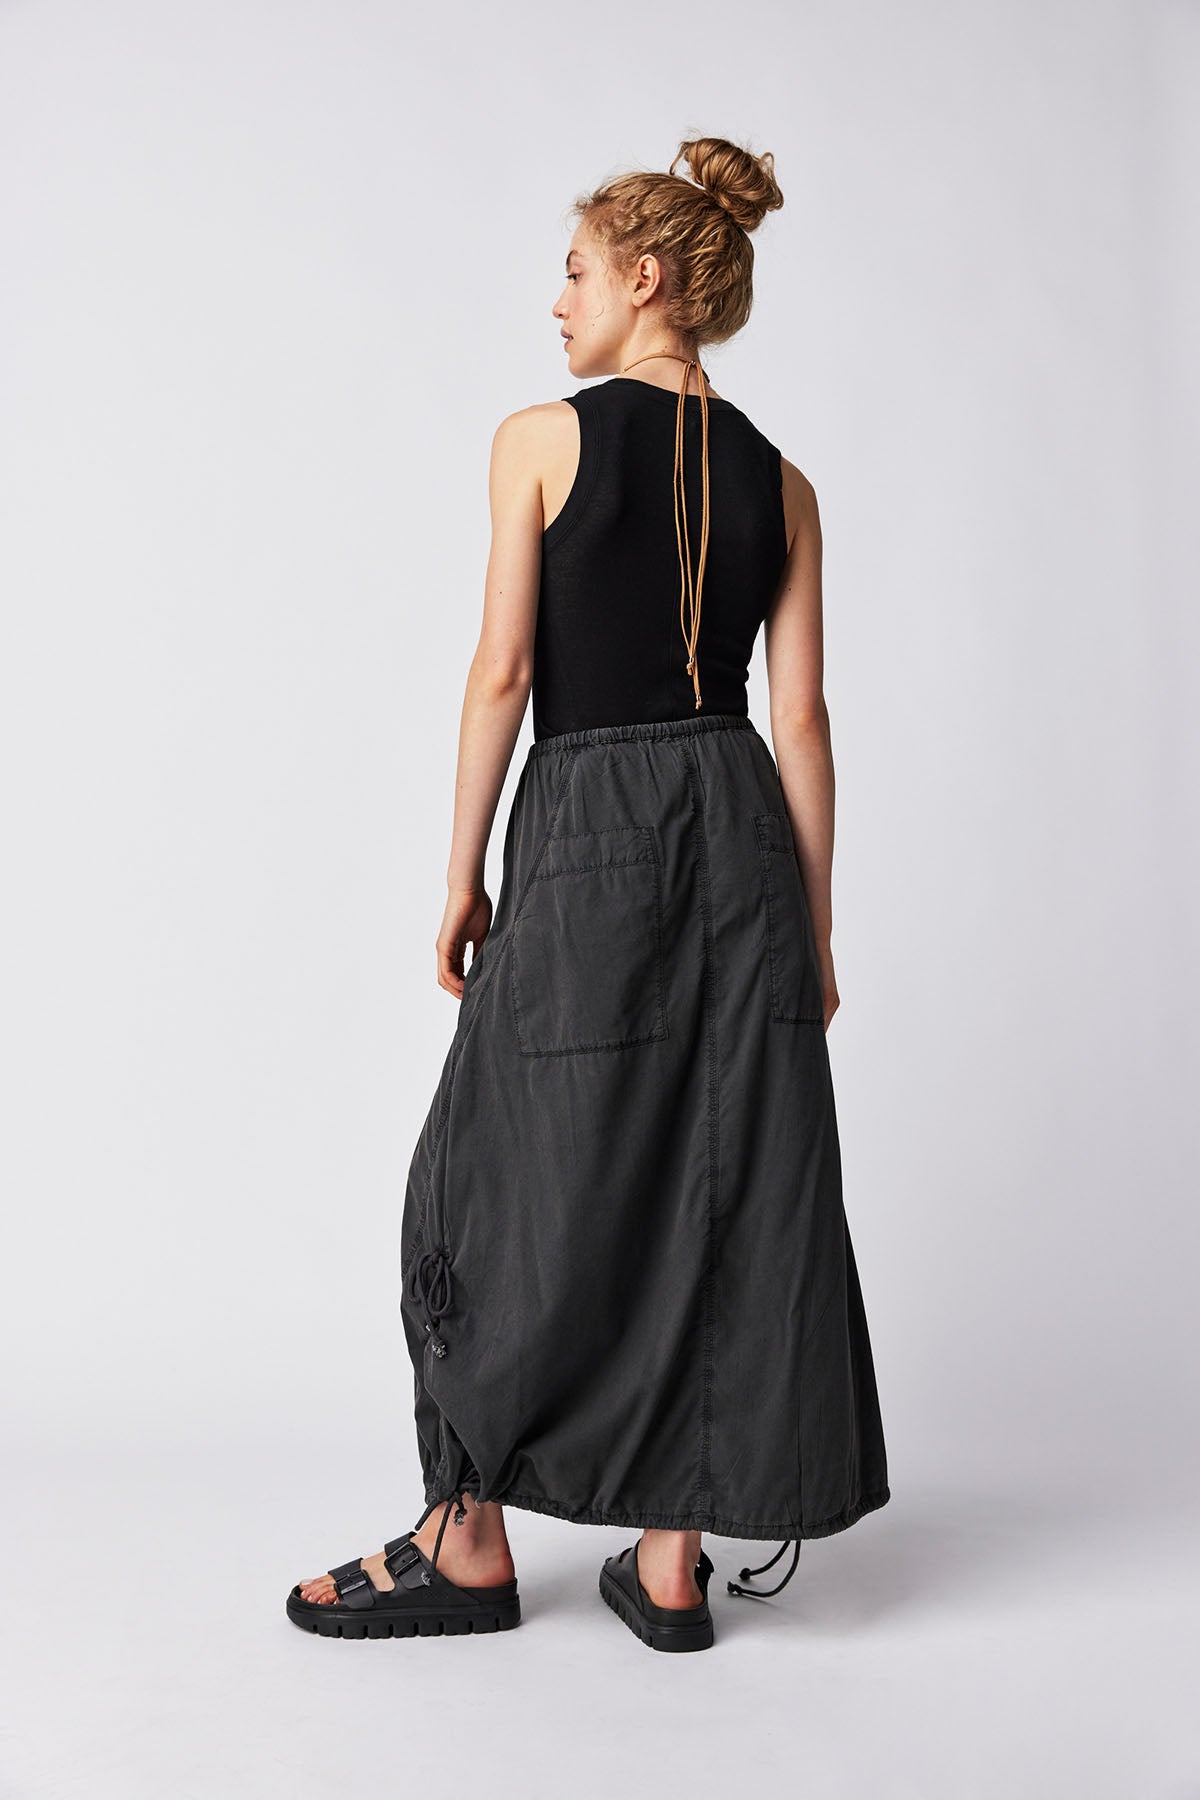 Free People - Picture Perfect Parachute - Black 2 - Back